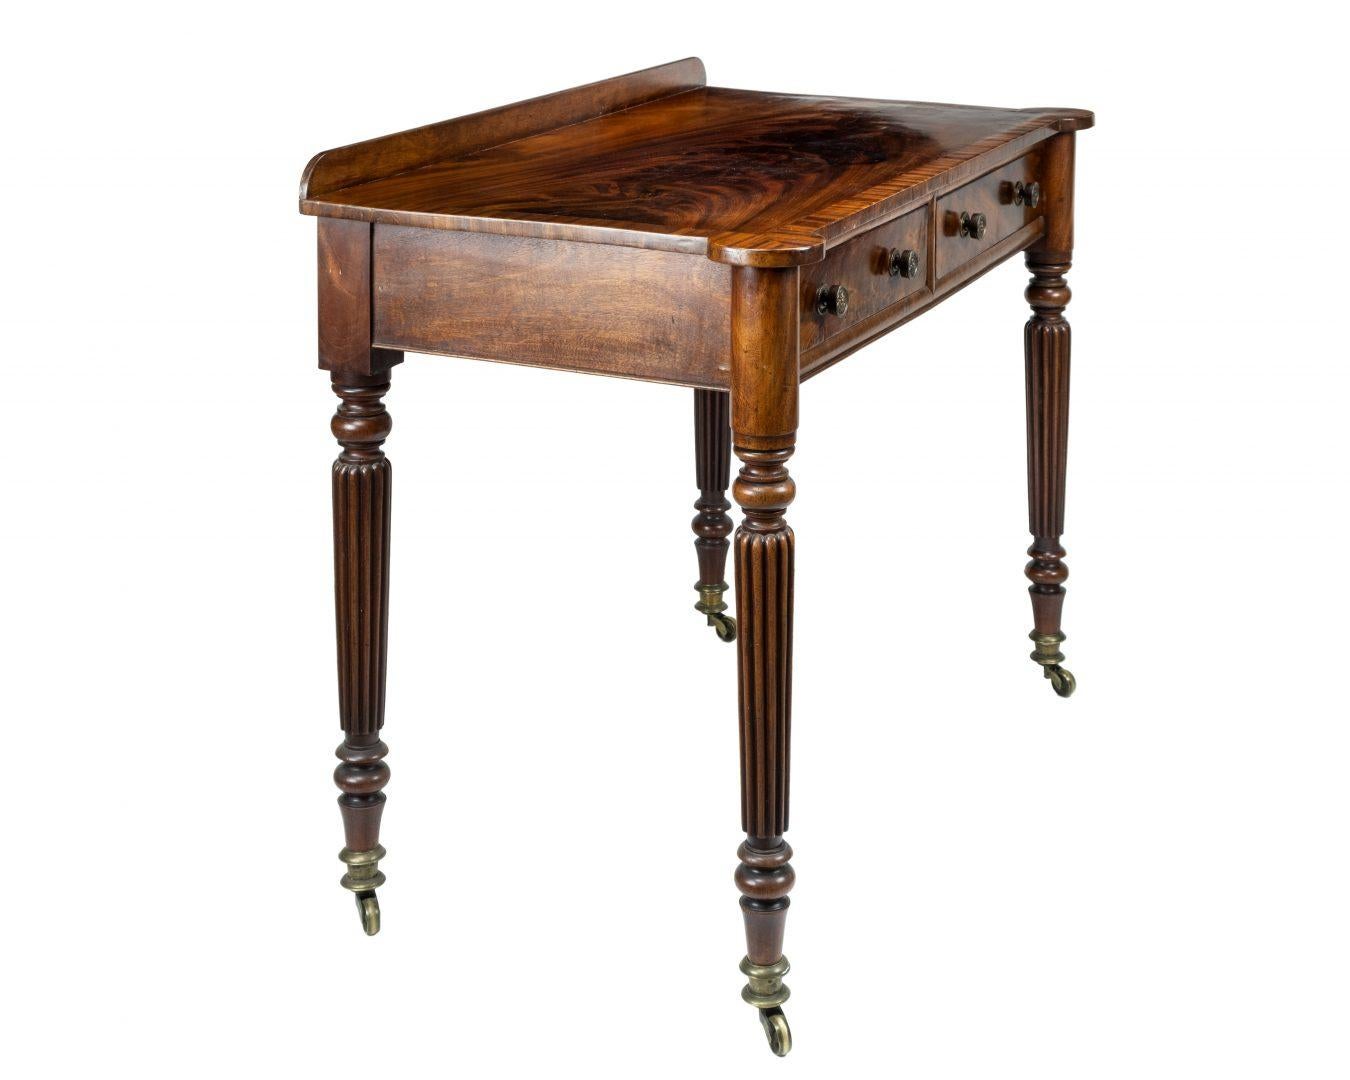 Early 19th Century 19th Century Figured Mahogany Side Table Attributed to Gillows